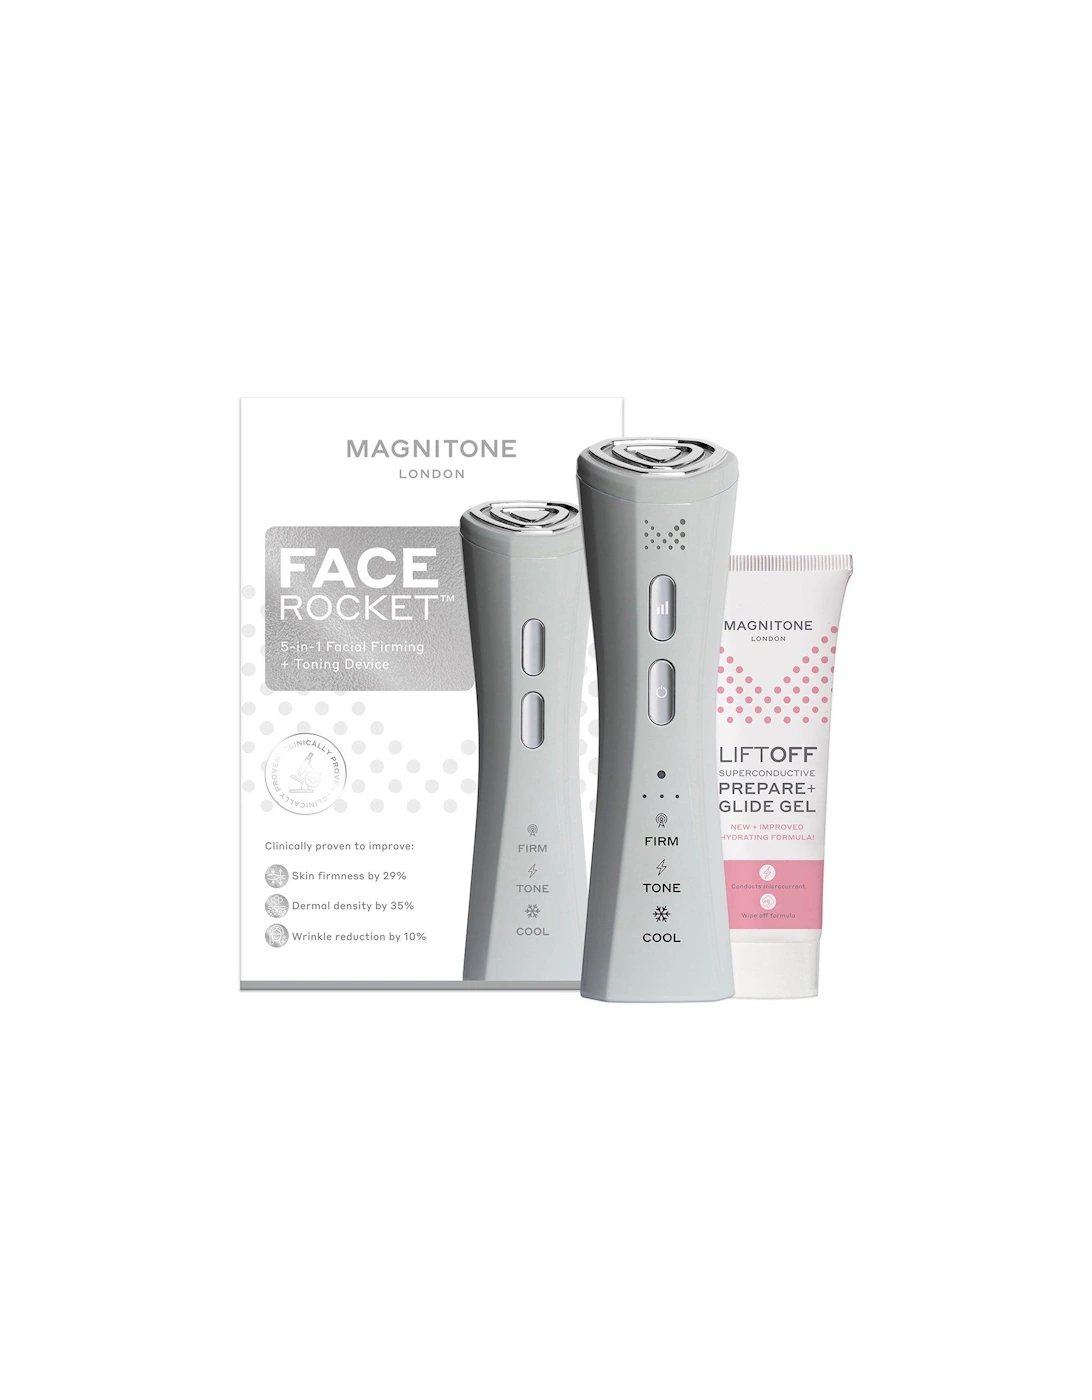 Magnitone FaceRocket 5-in-1 Facial Firming + Toning Device, 2 of 1